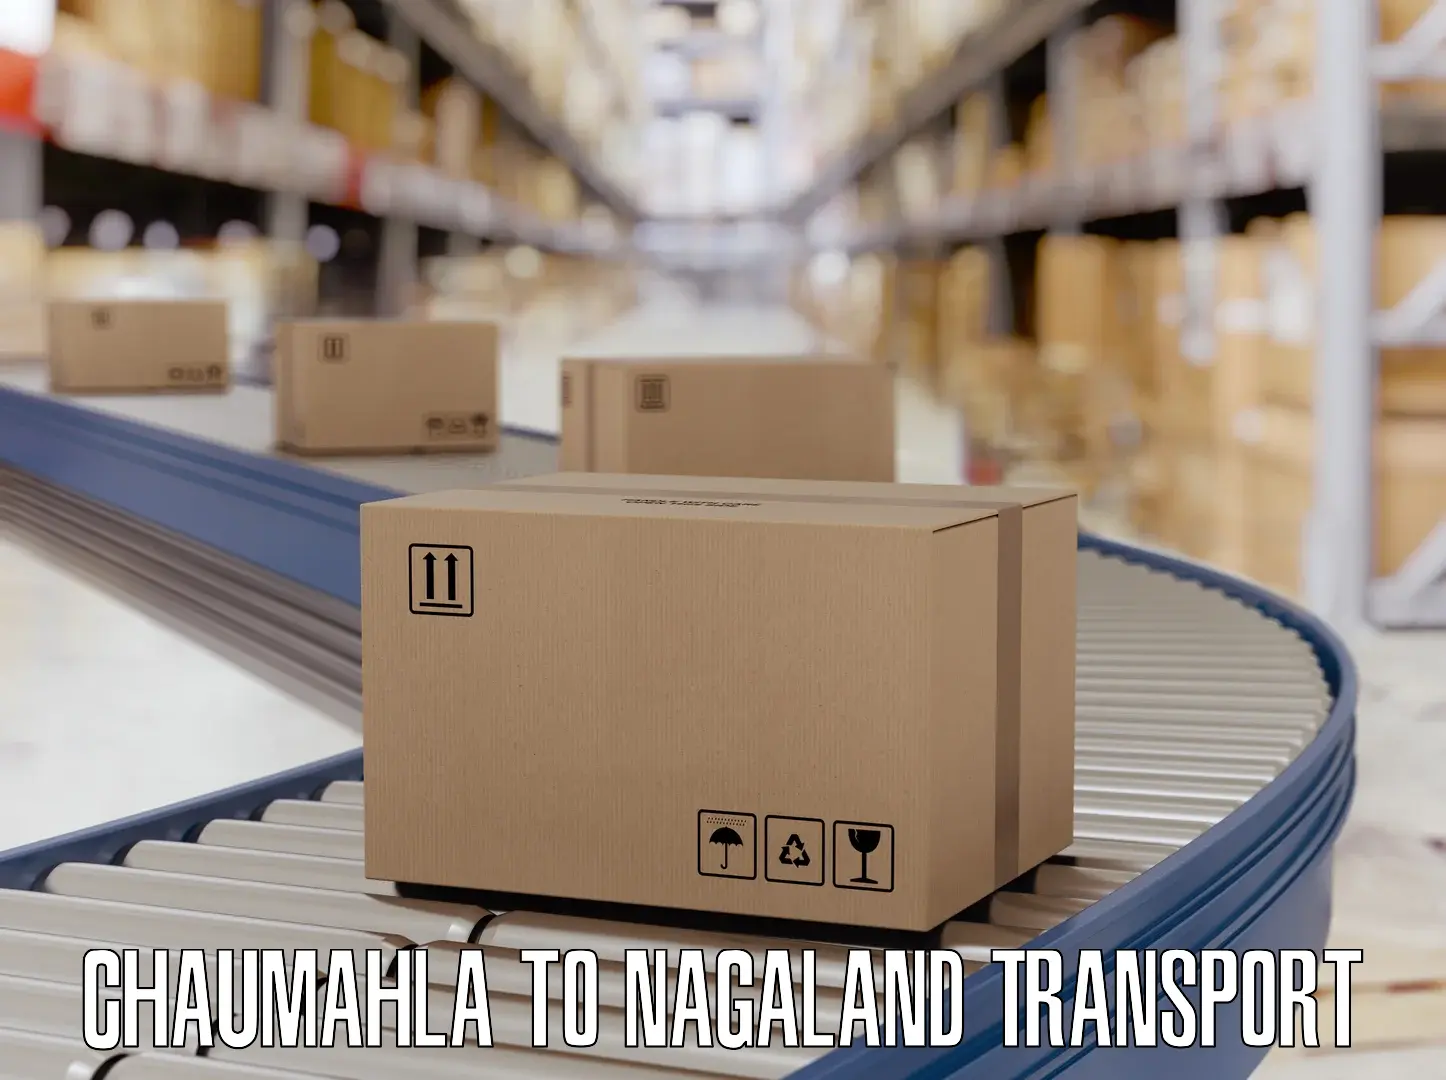 Transport shared services Chaumahla to Nagaland